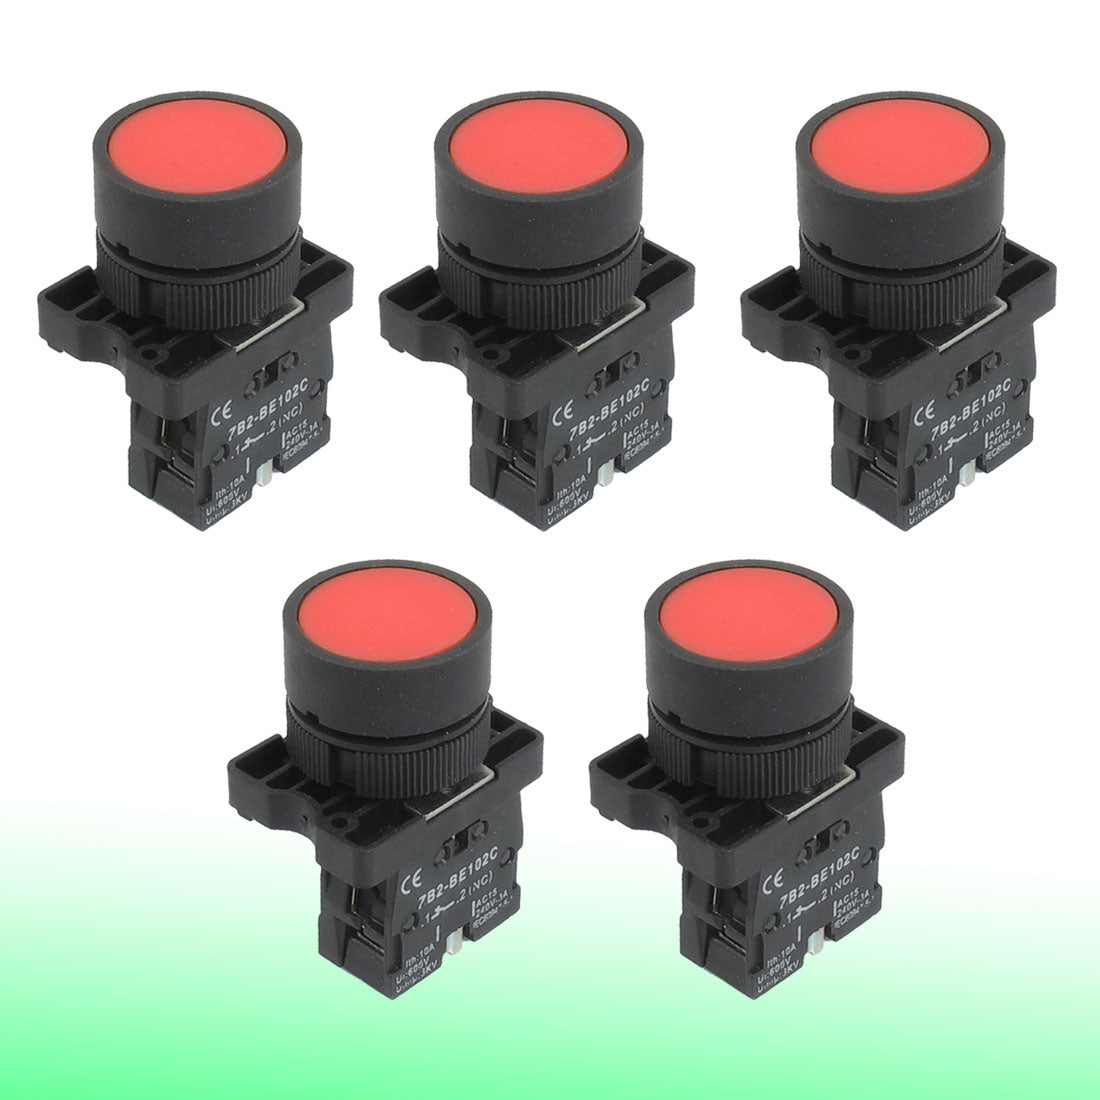 uxcell Uxcell 5pcs 22mm 1 NC N/C Red Sign Momentary Push Button Switch 600V 10A ZB2-EA42